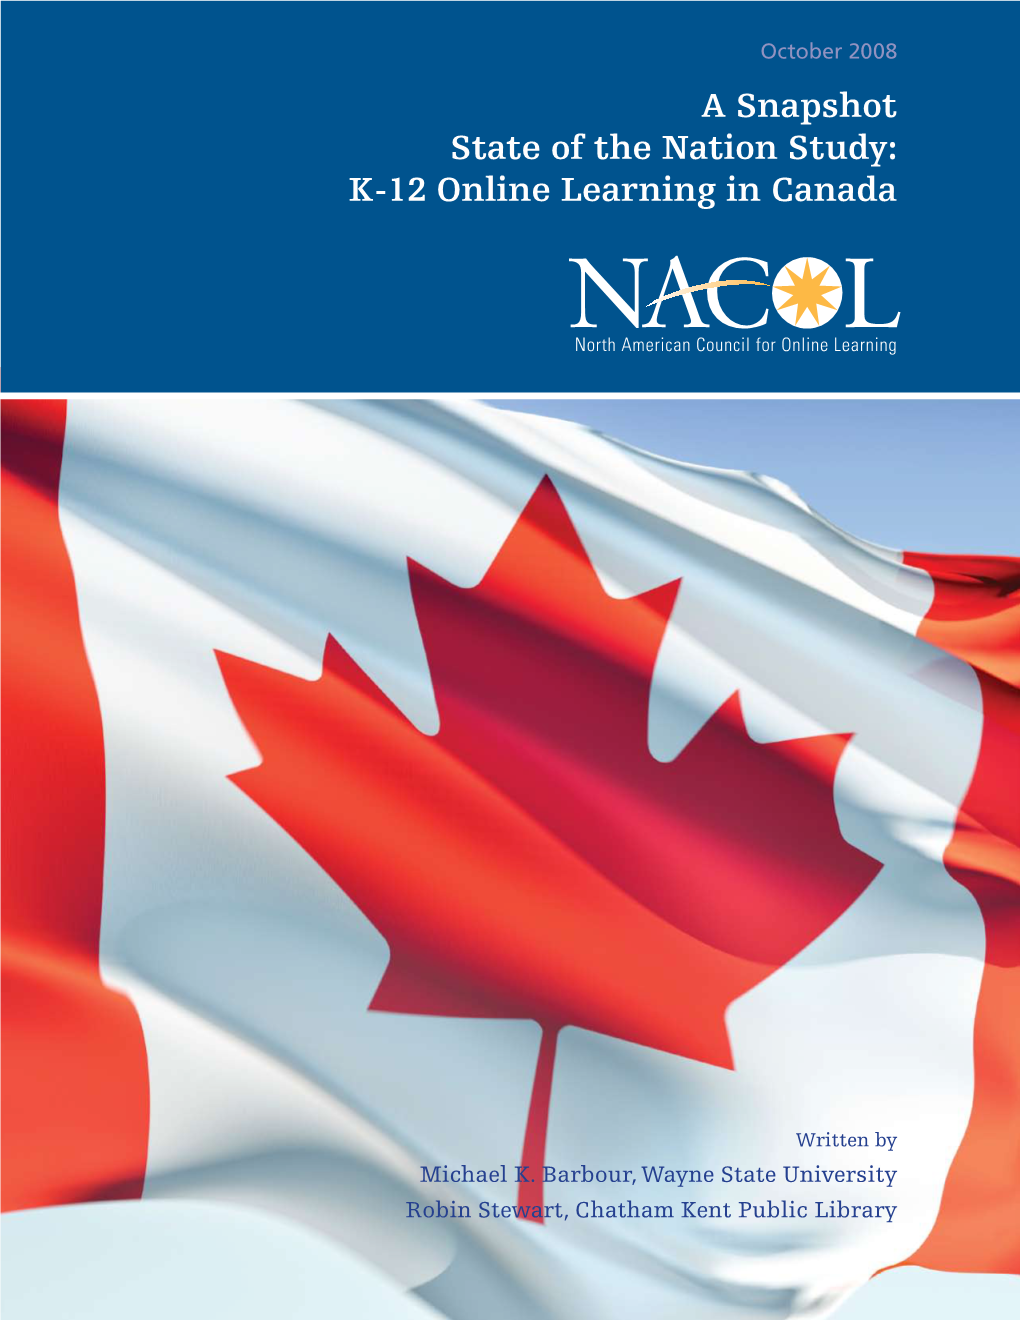 A Snapshot State of the Nation Study: K-12 Online Learning in Canada